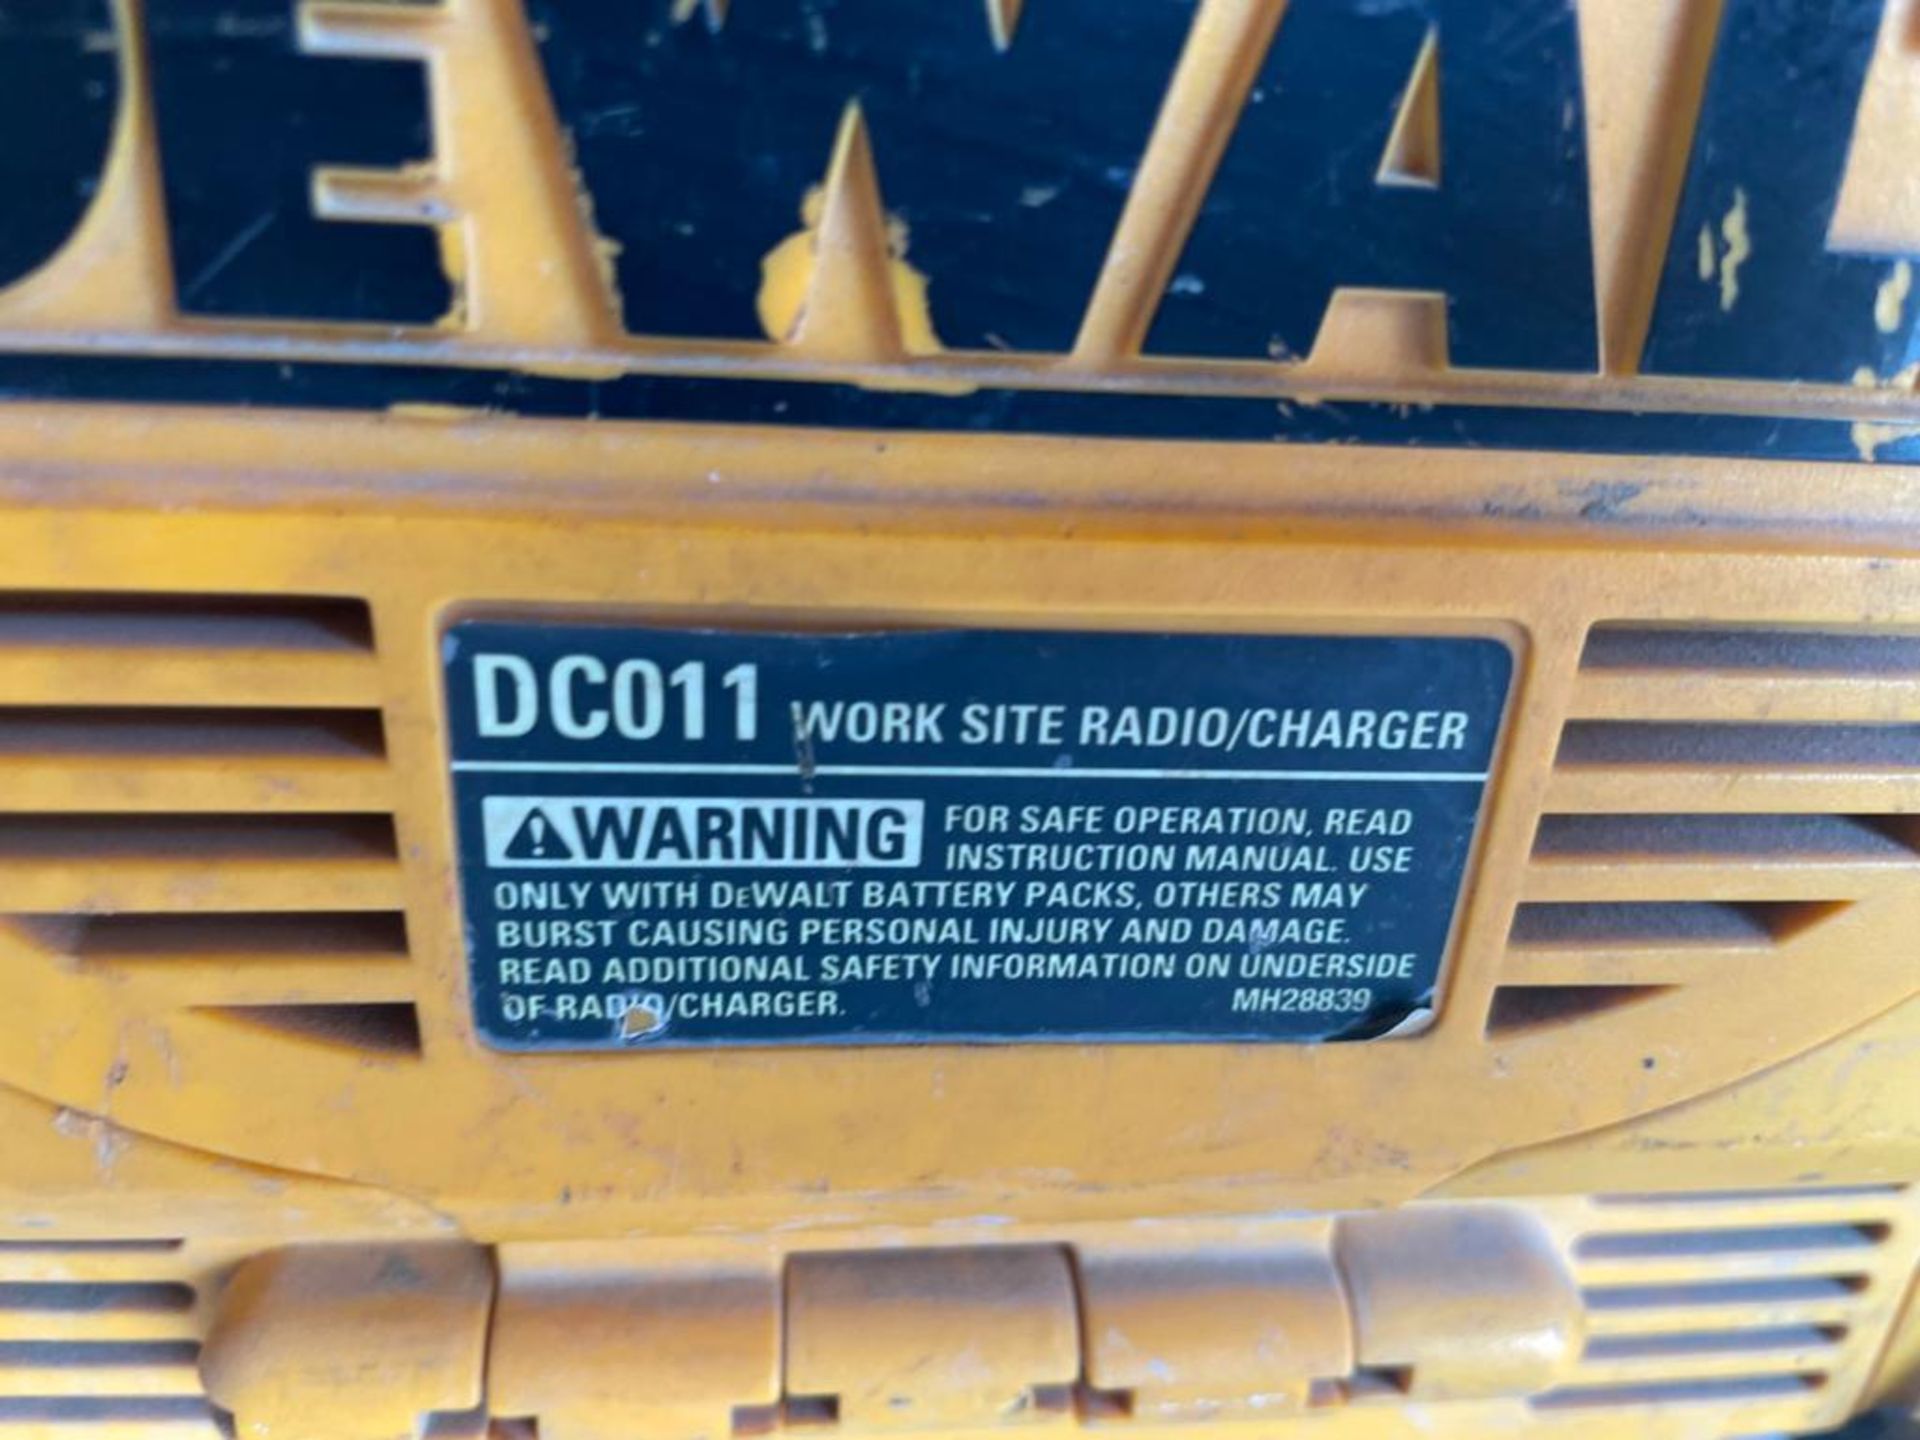 DeWalt DC011 Work Site Radio/Charger. Located in Hazelwood, MO - Image 3 of 3